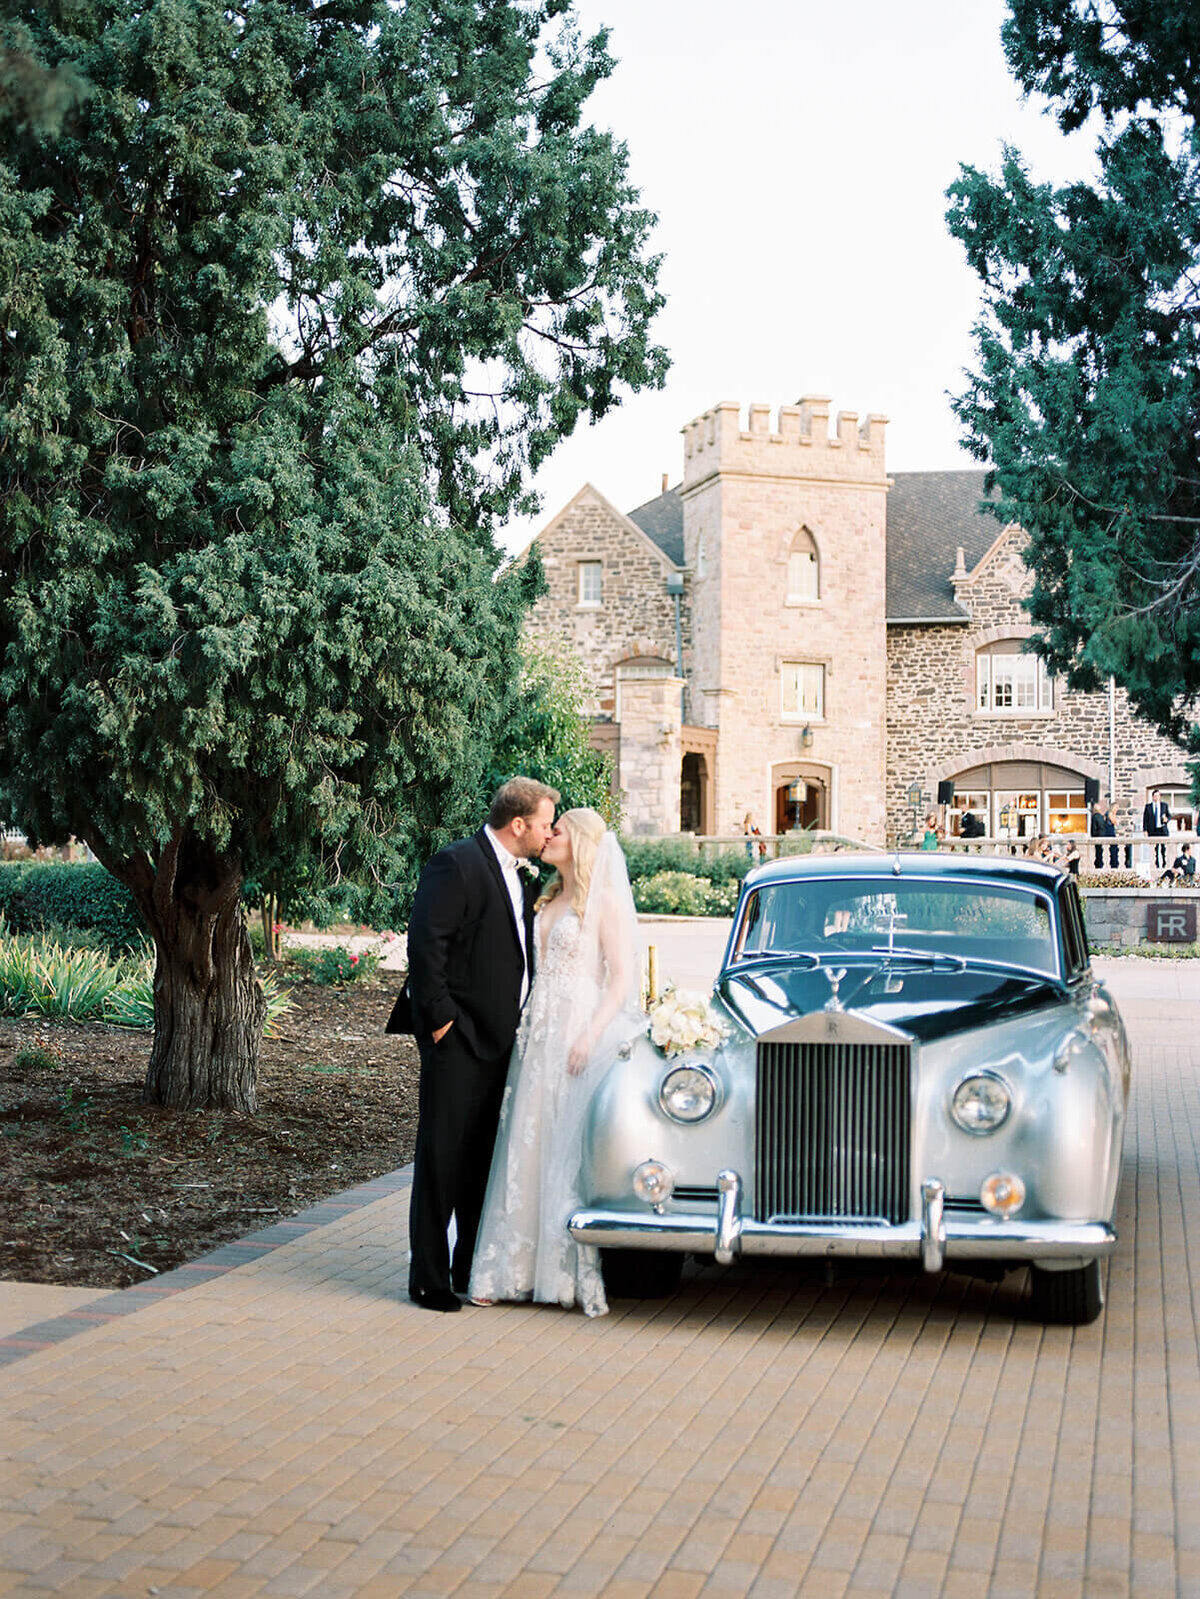 Bride and groom share a kiss by a classic car in front of a castle in Colorado